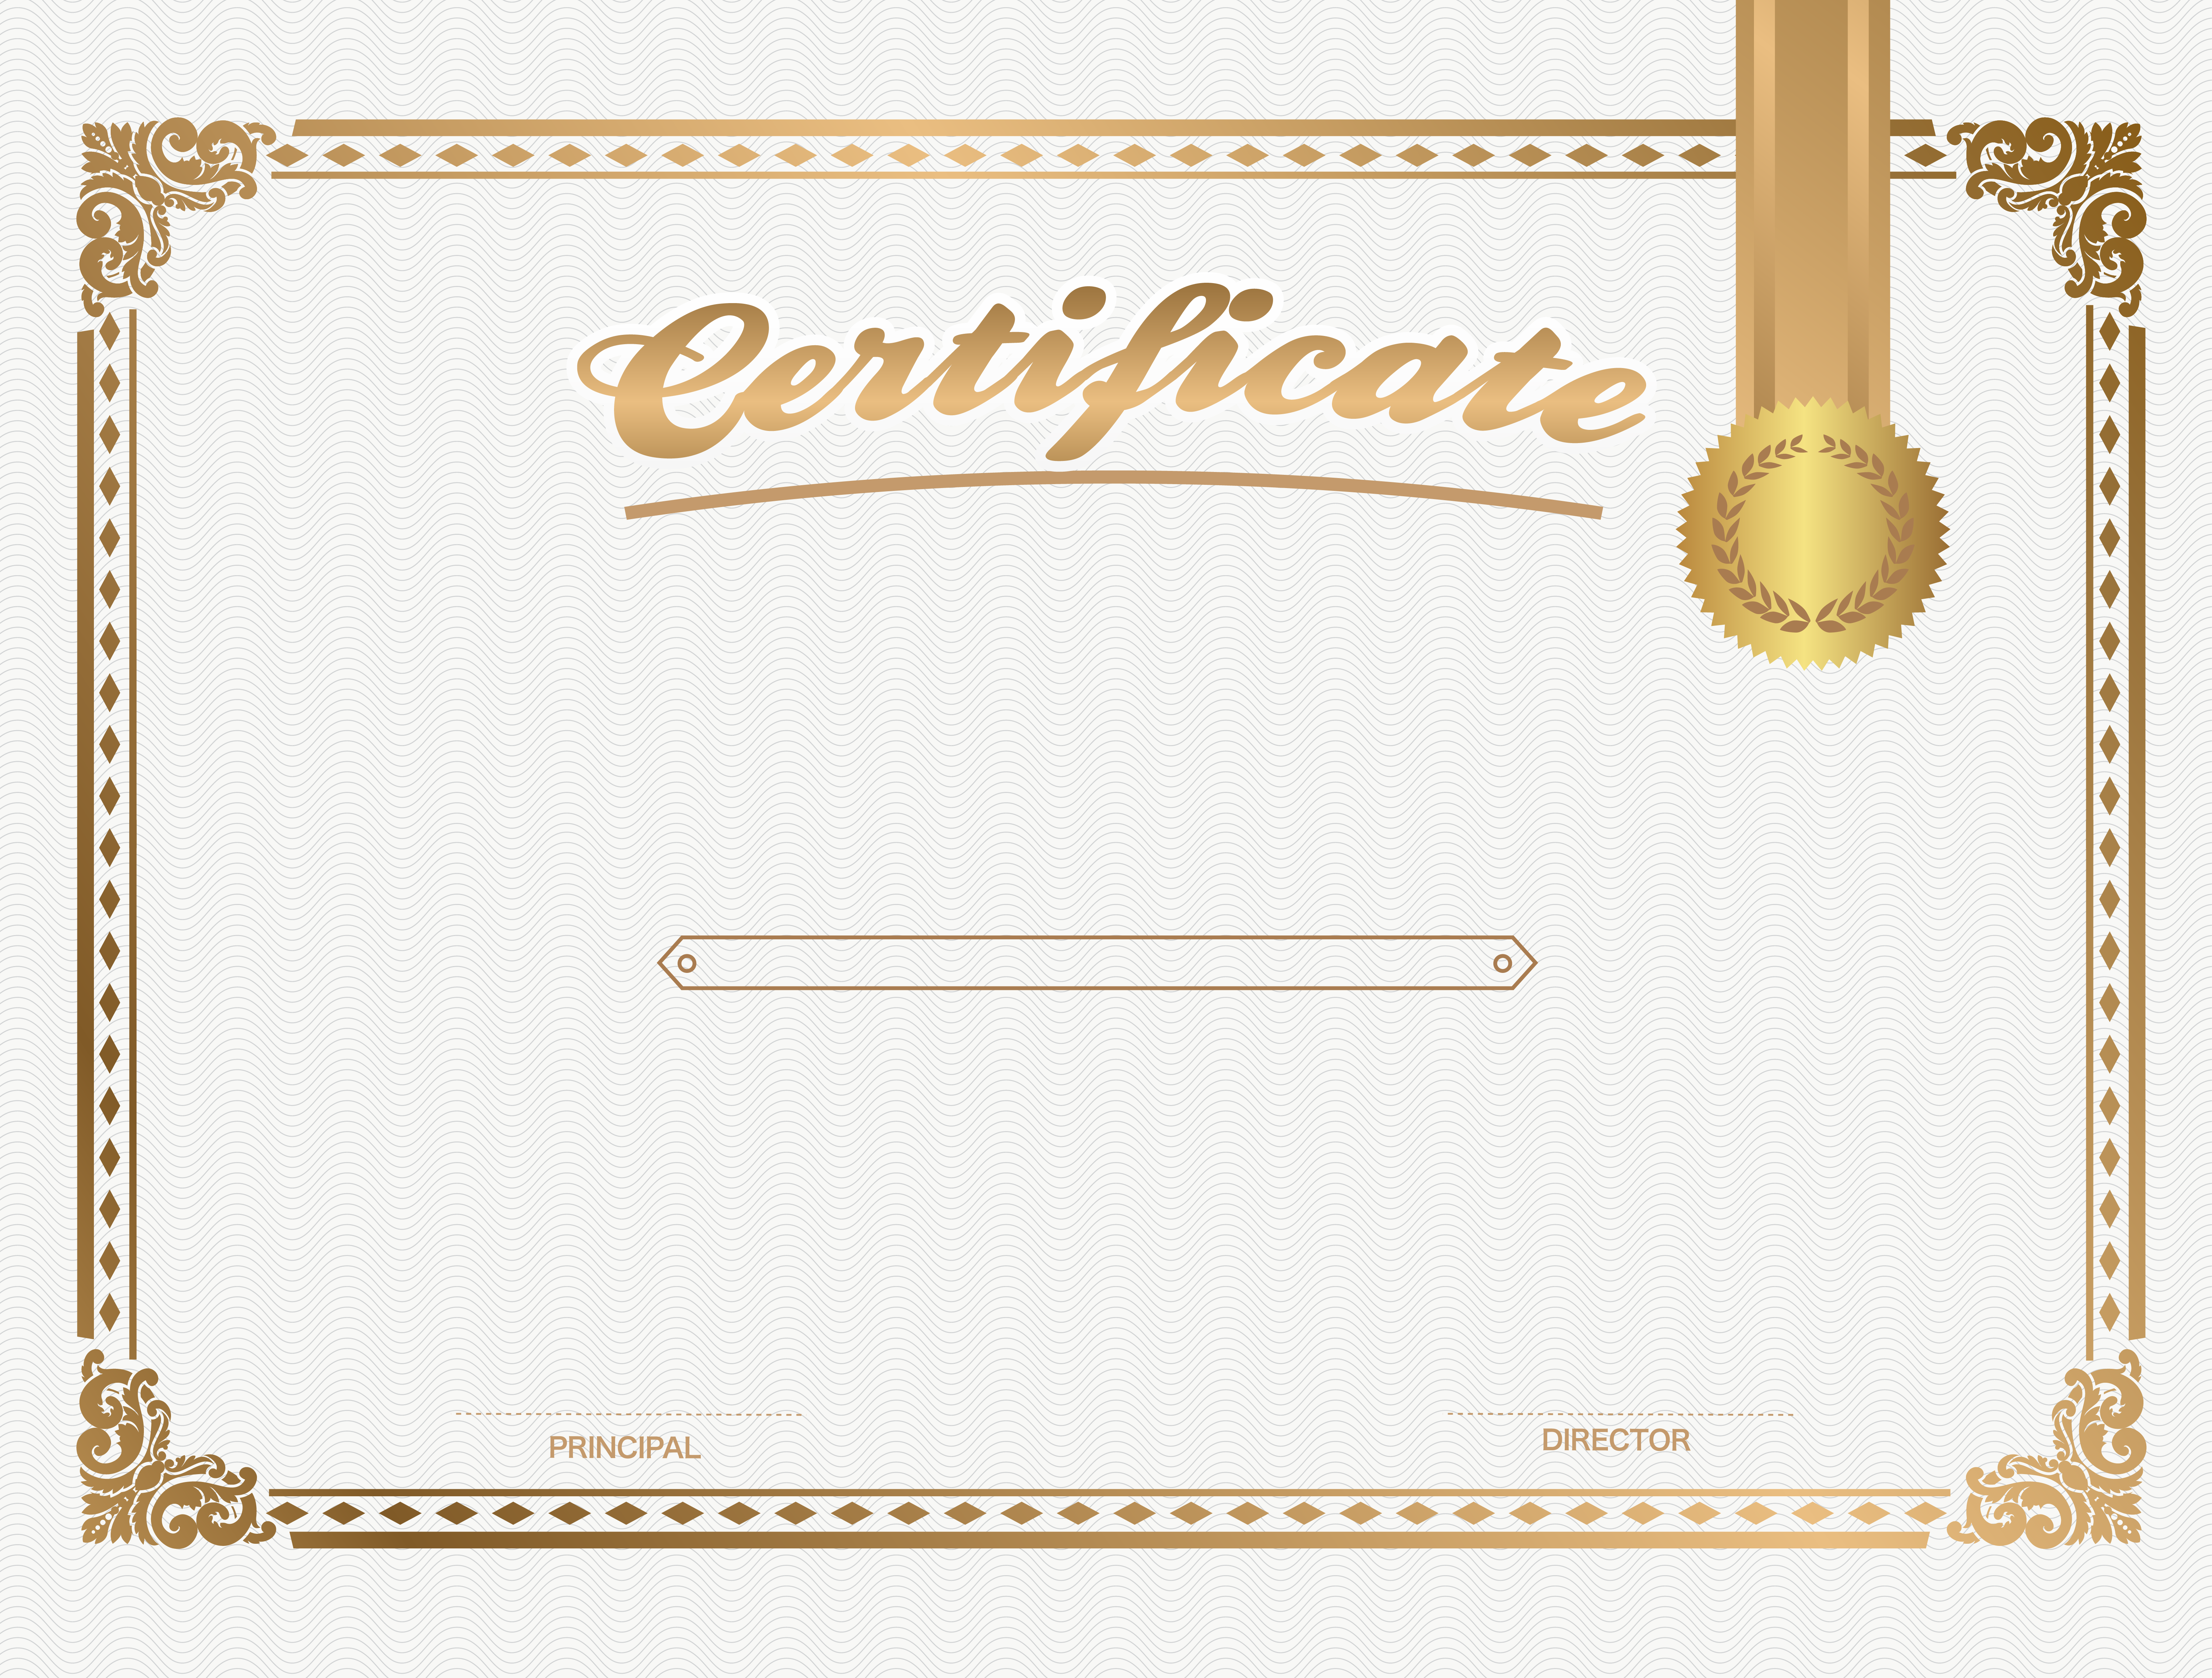 Picture Product Certificate Frame Academic Royalty Template PNG Image